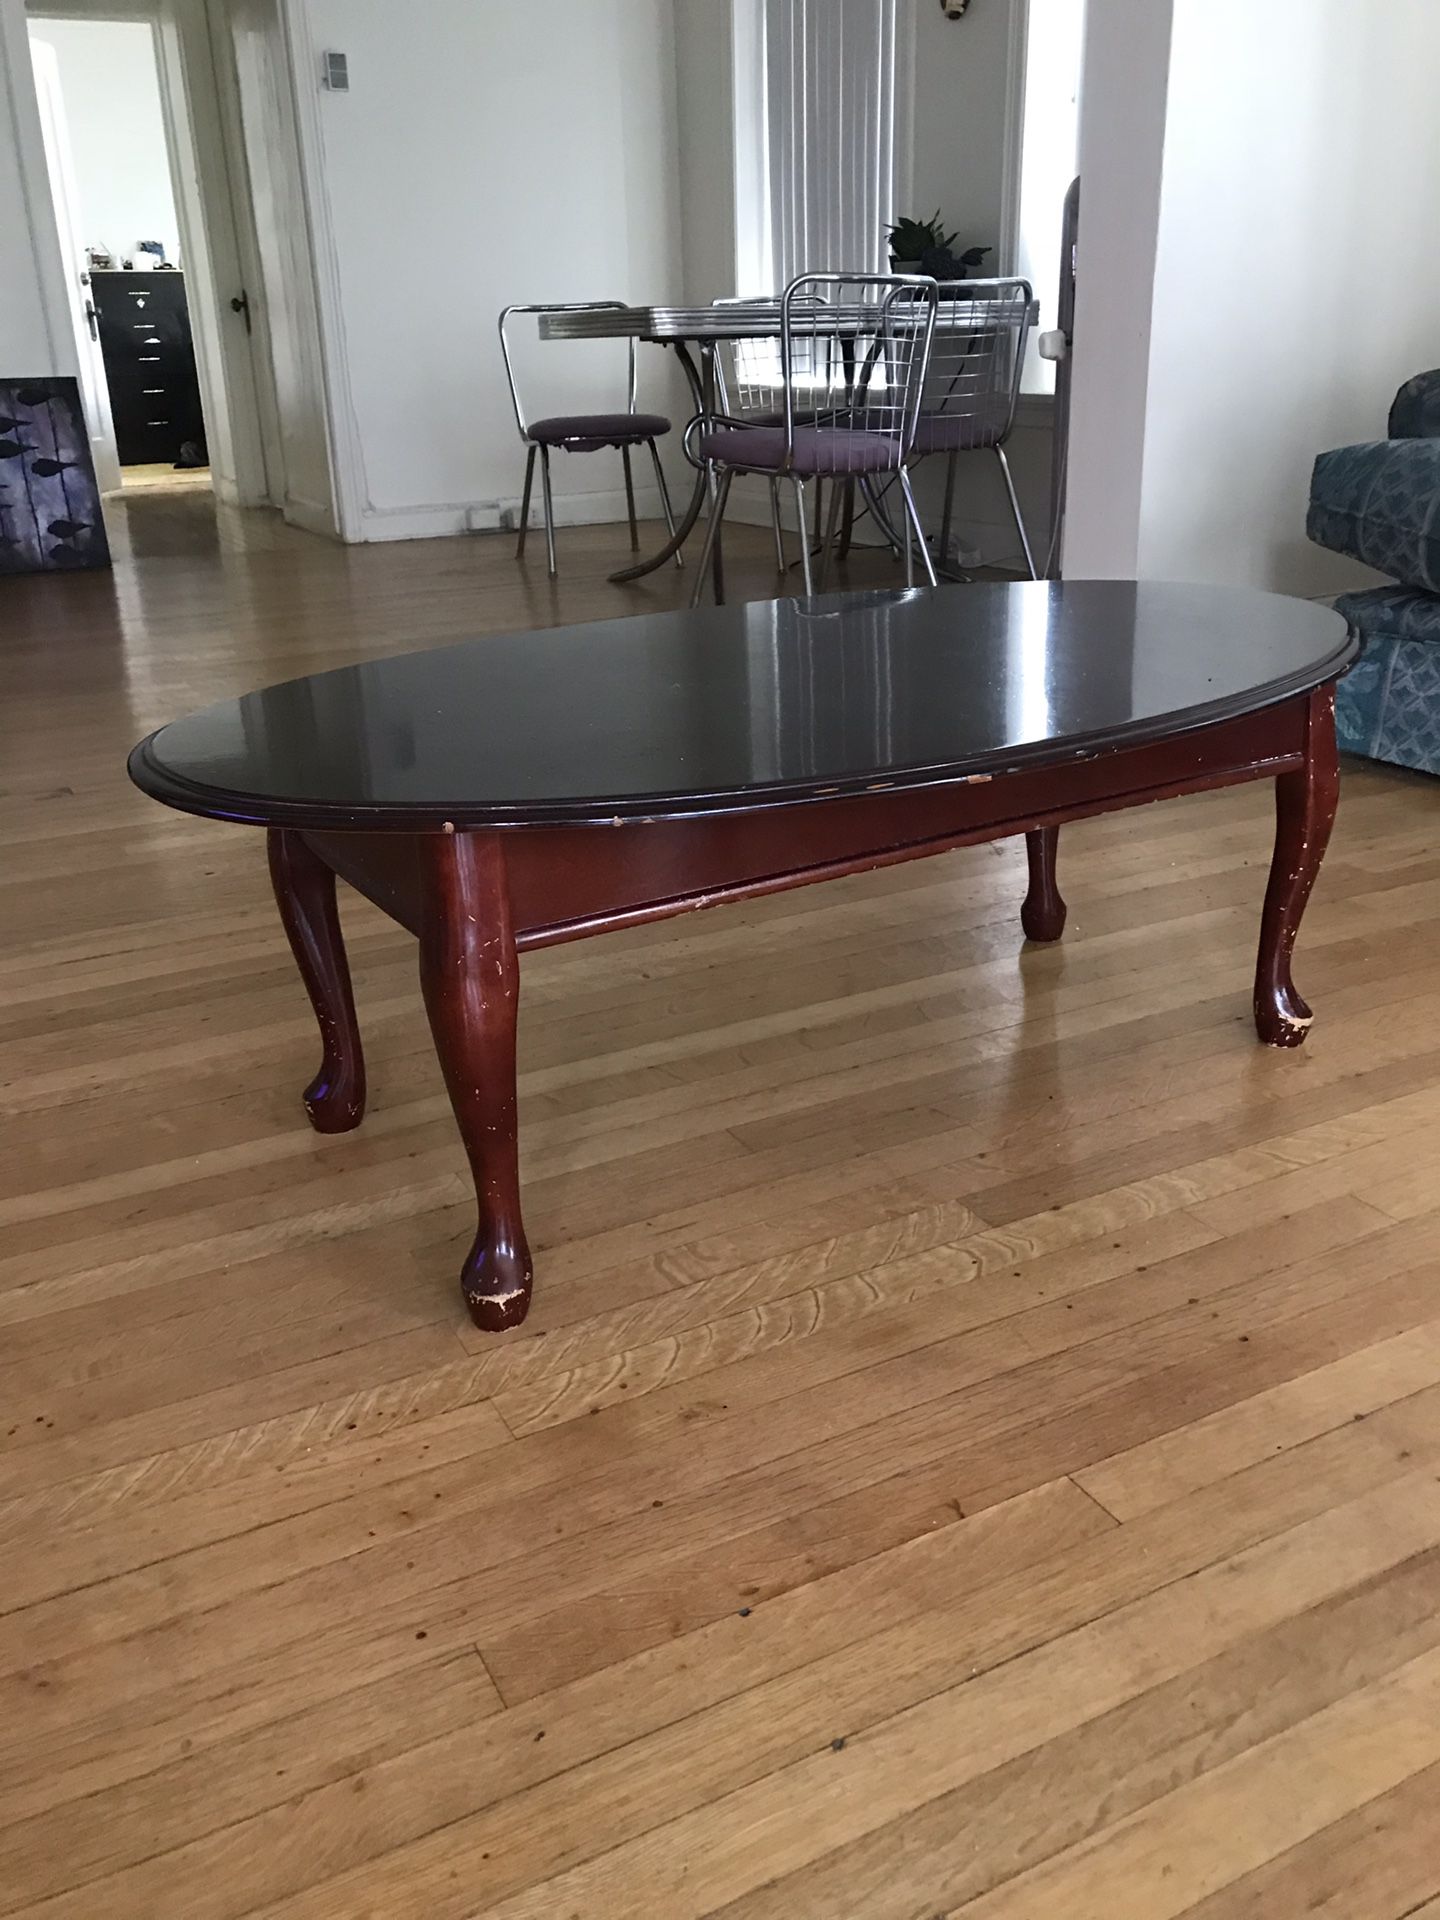 Oval coffee table, deep red wood color some wear and tear on the legs